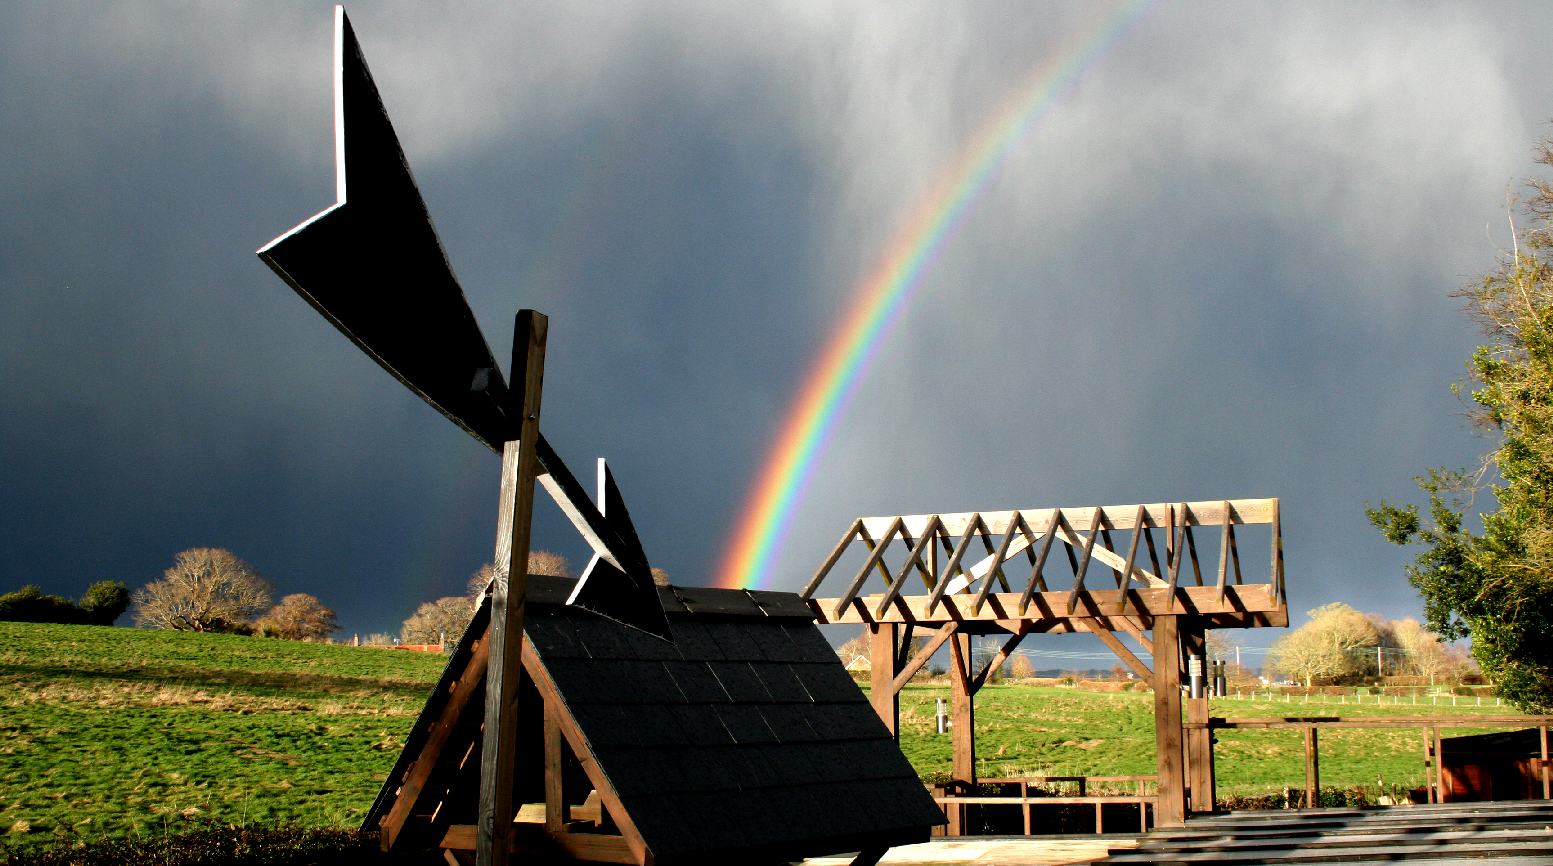 A rainbow over the well supplying drining water to Solar House